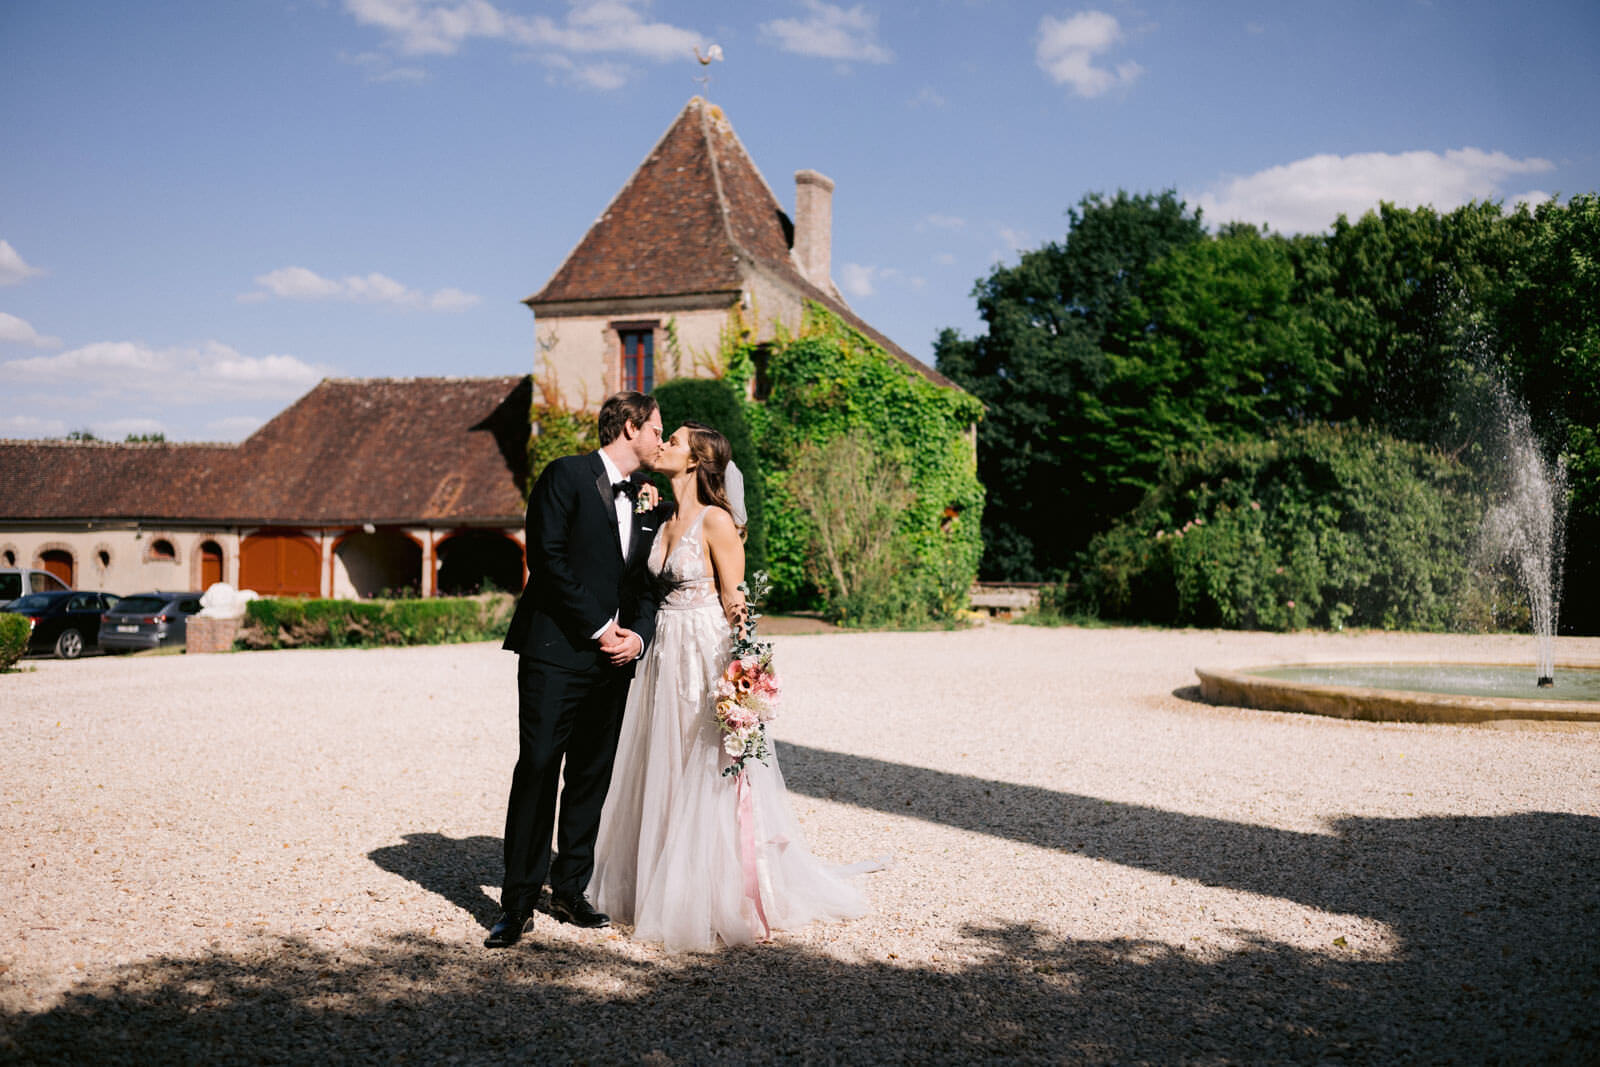 The bride and groom are kissing outside a chateau. Outdoor wedding destination image by Jenny Fu Studio